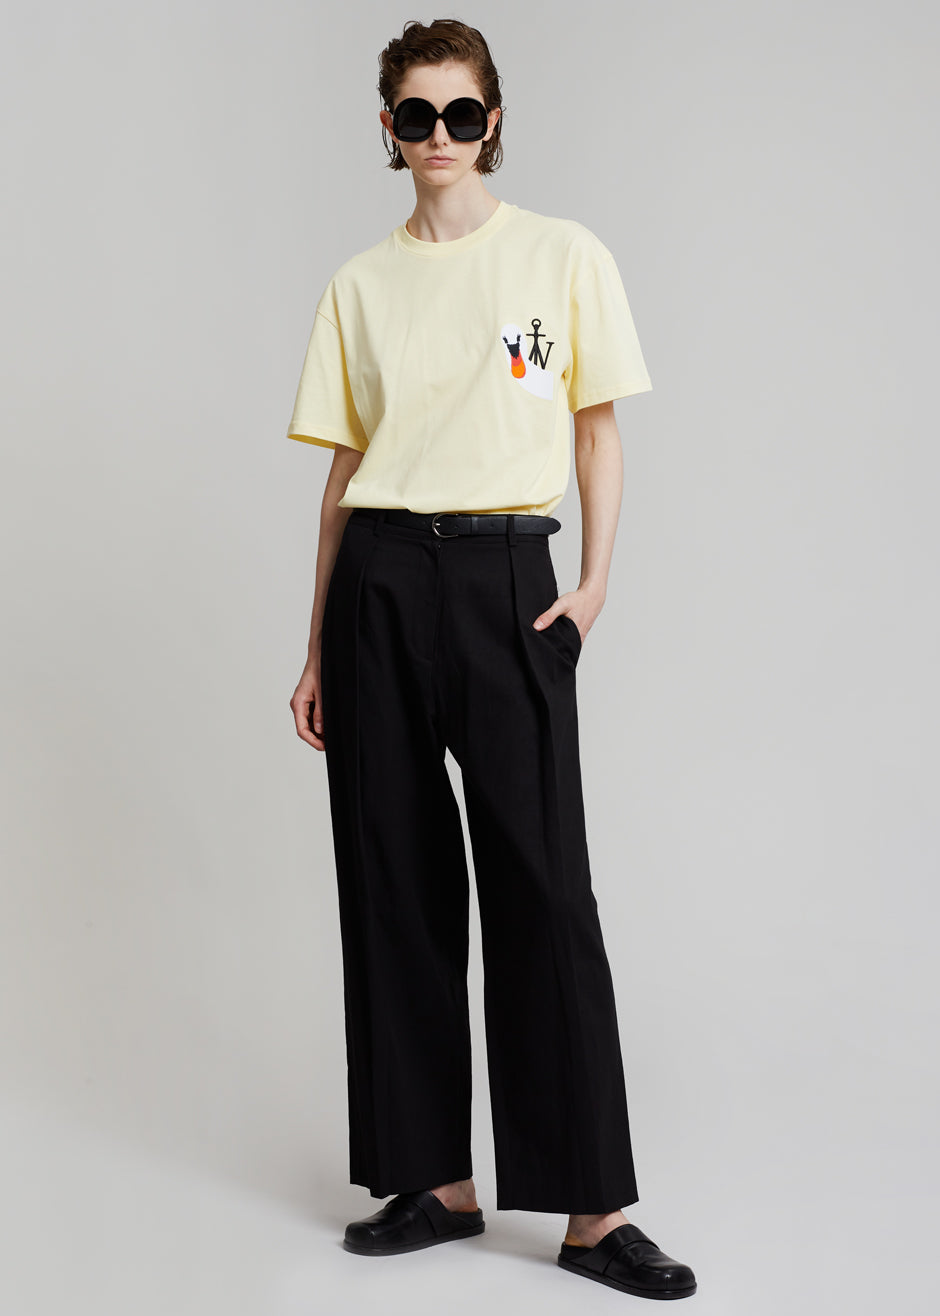 JW Anderson Swan Embroidered Logo T-Shirt - Yellow - 3